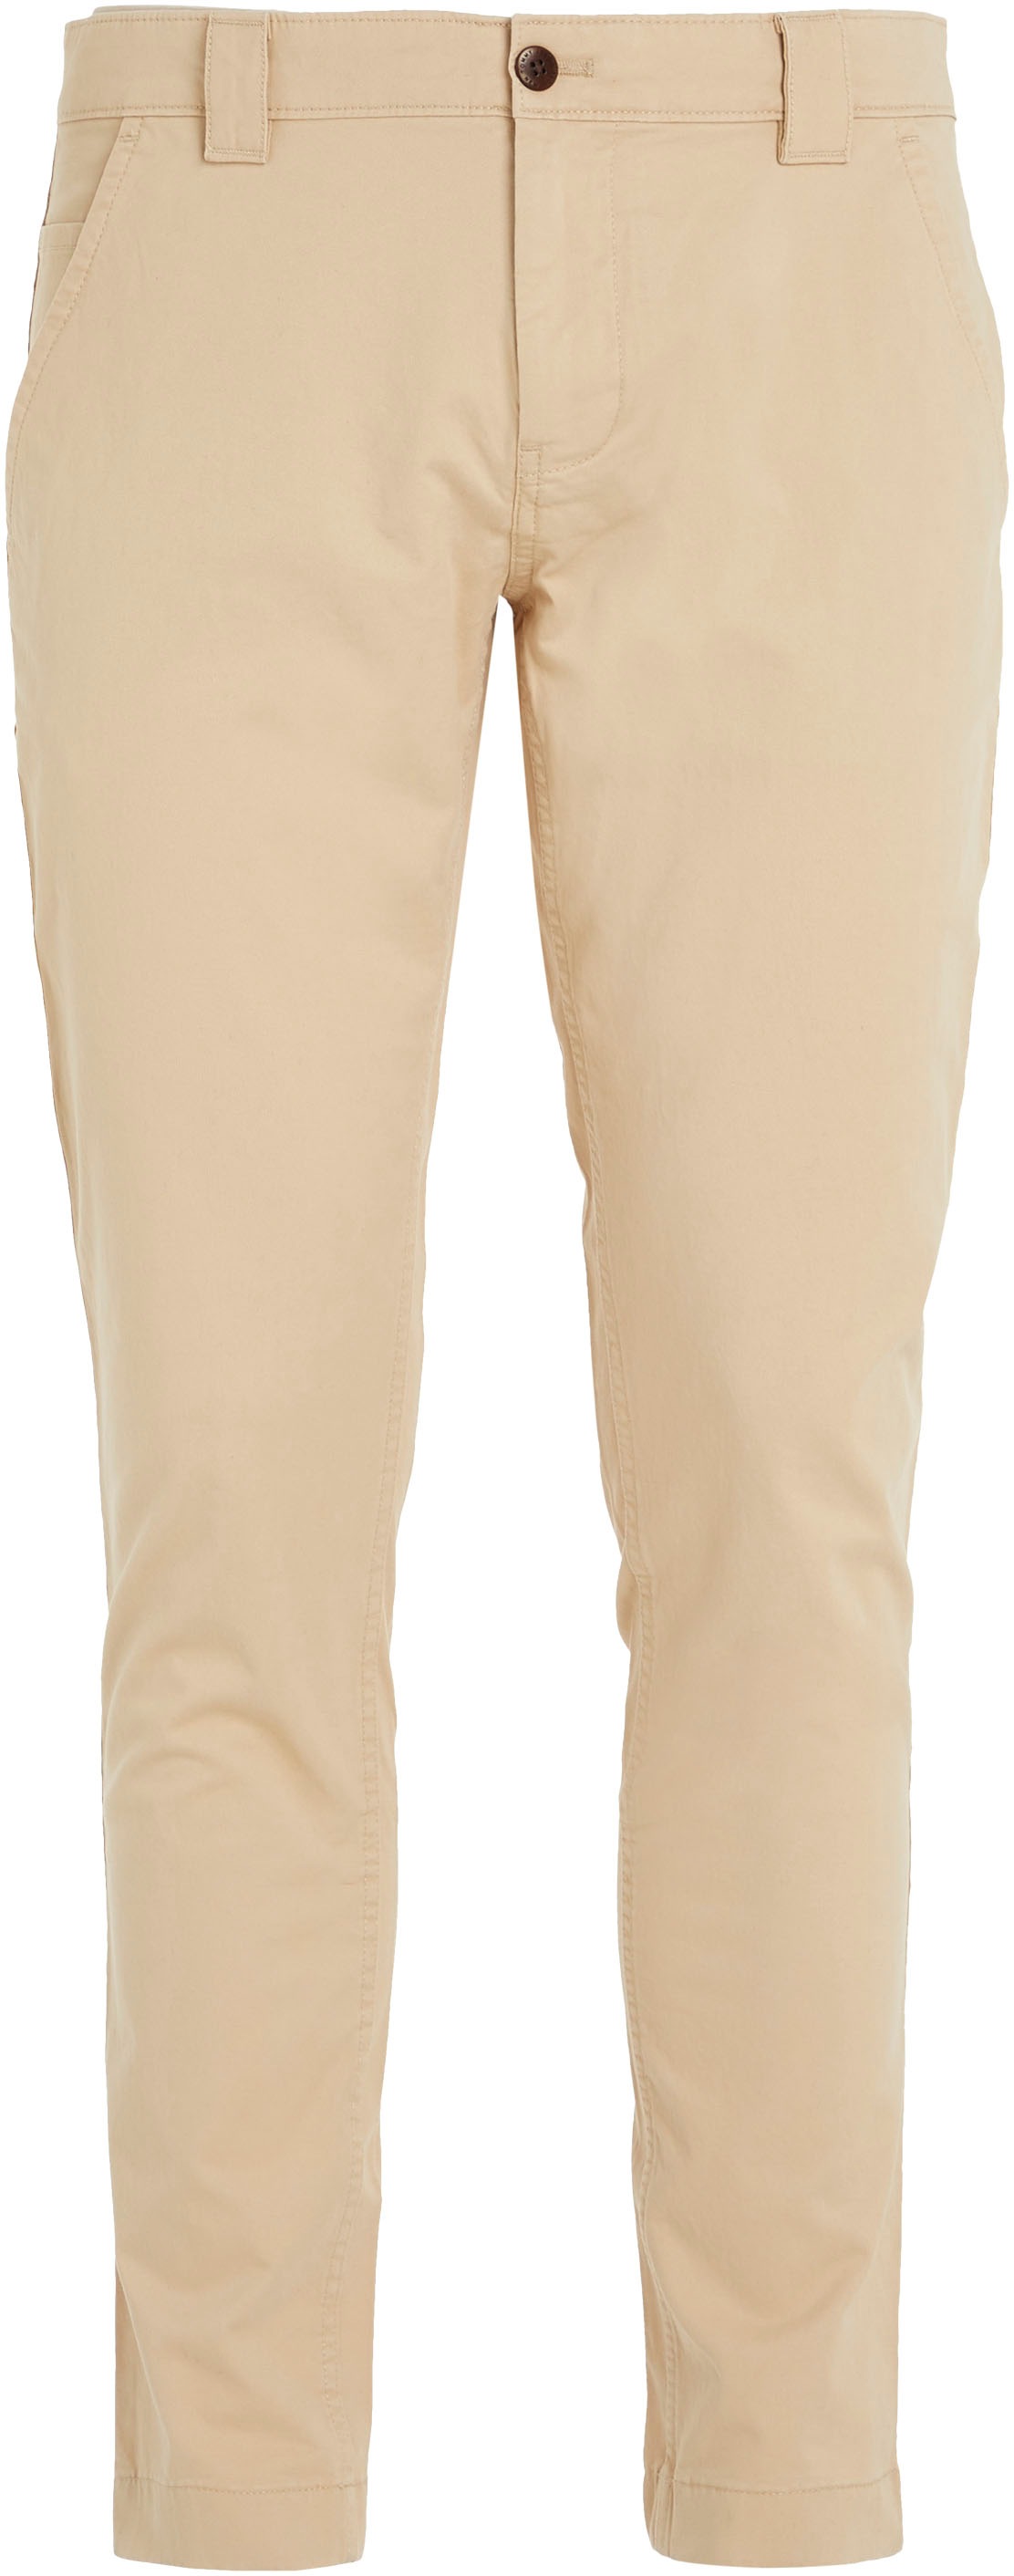 OTTO Chinohose SCANTON CHINO mit Tommy »TJM online Markenlabel PANT«, shoppen Jeans bei